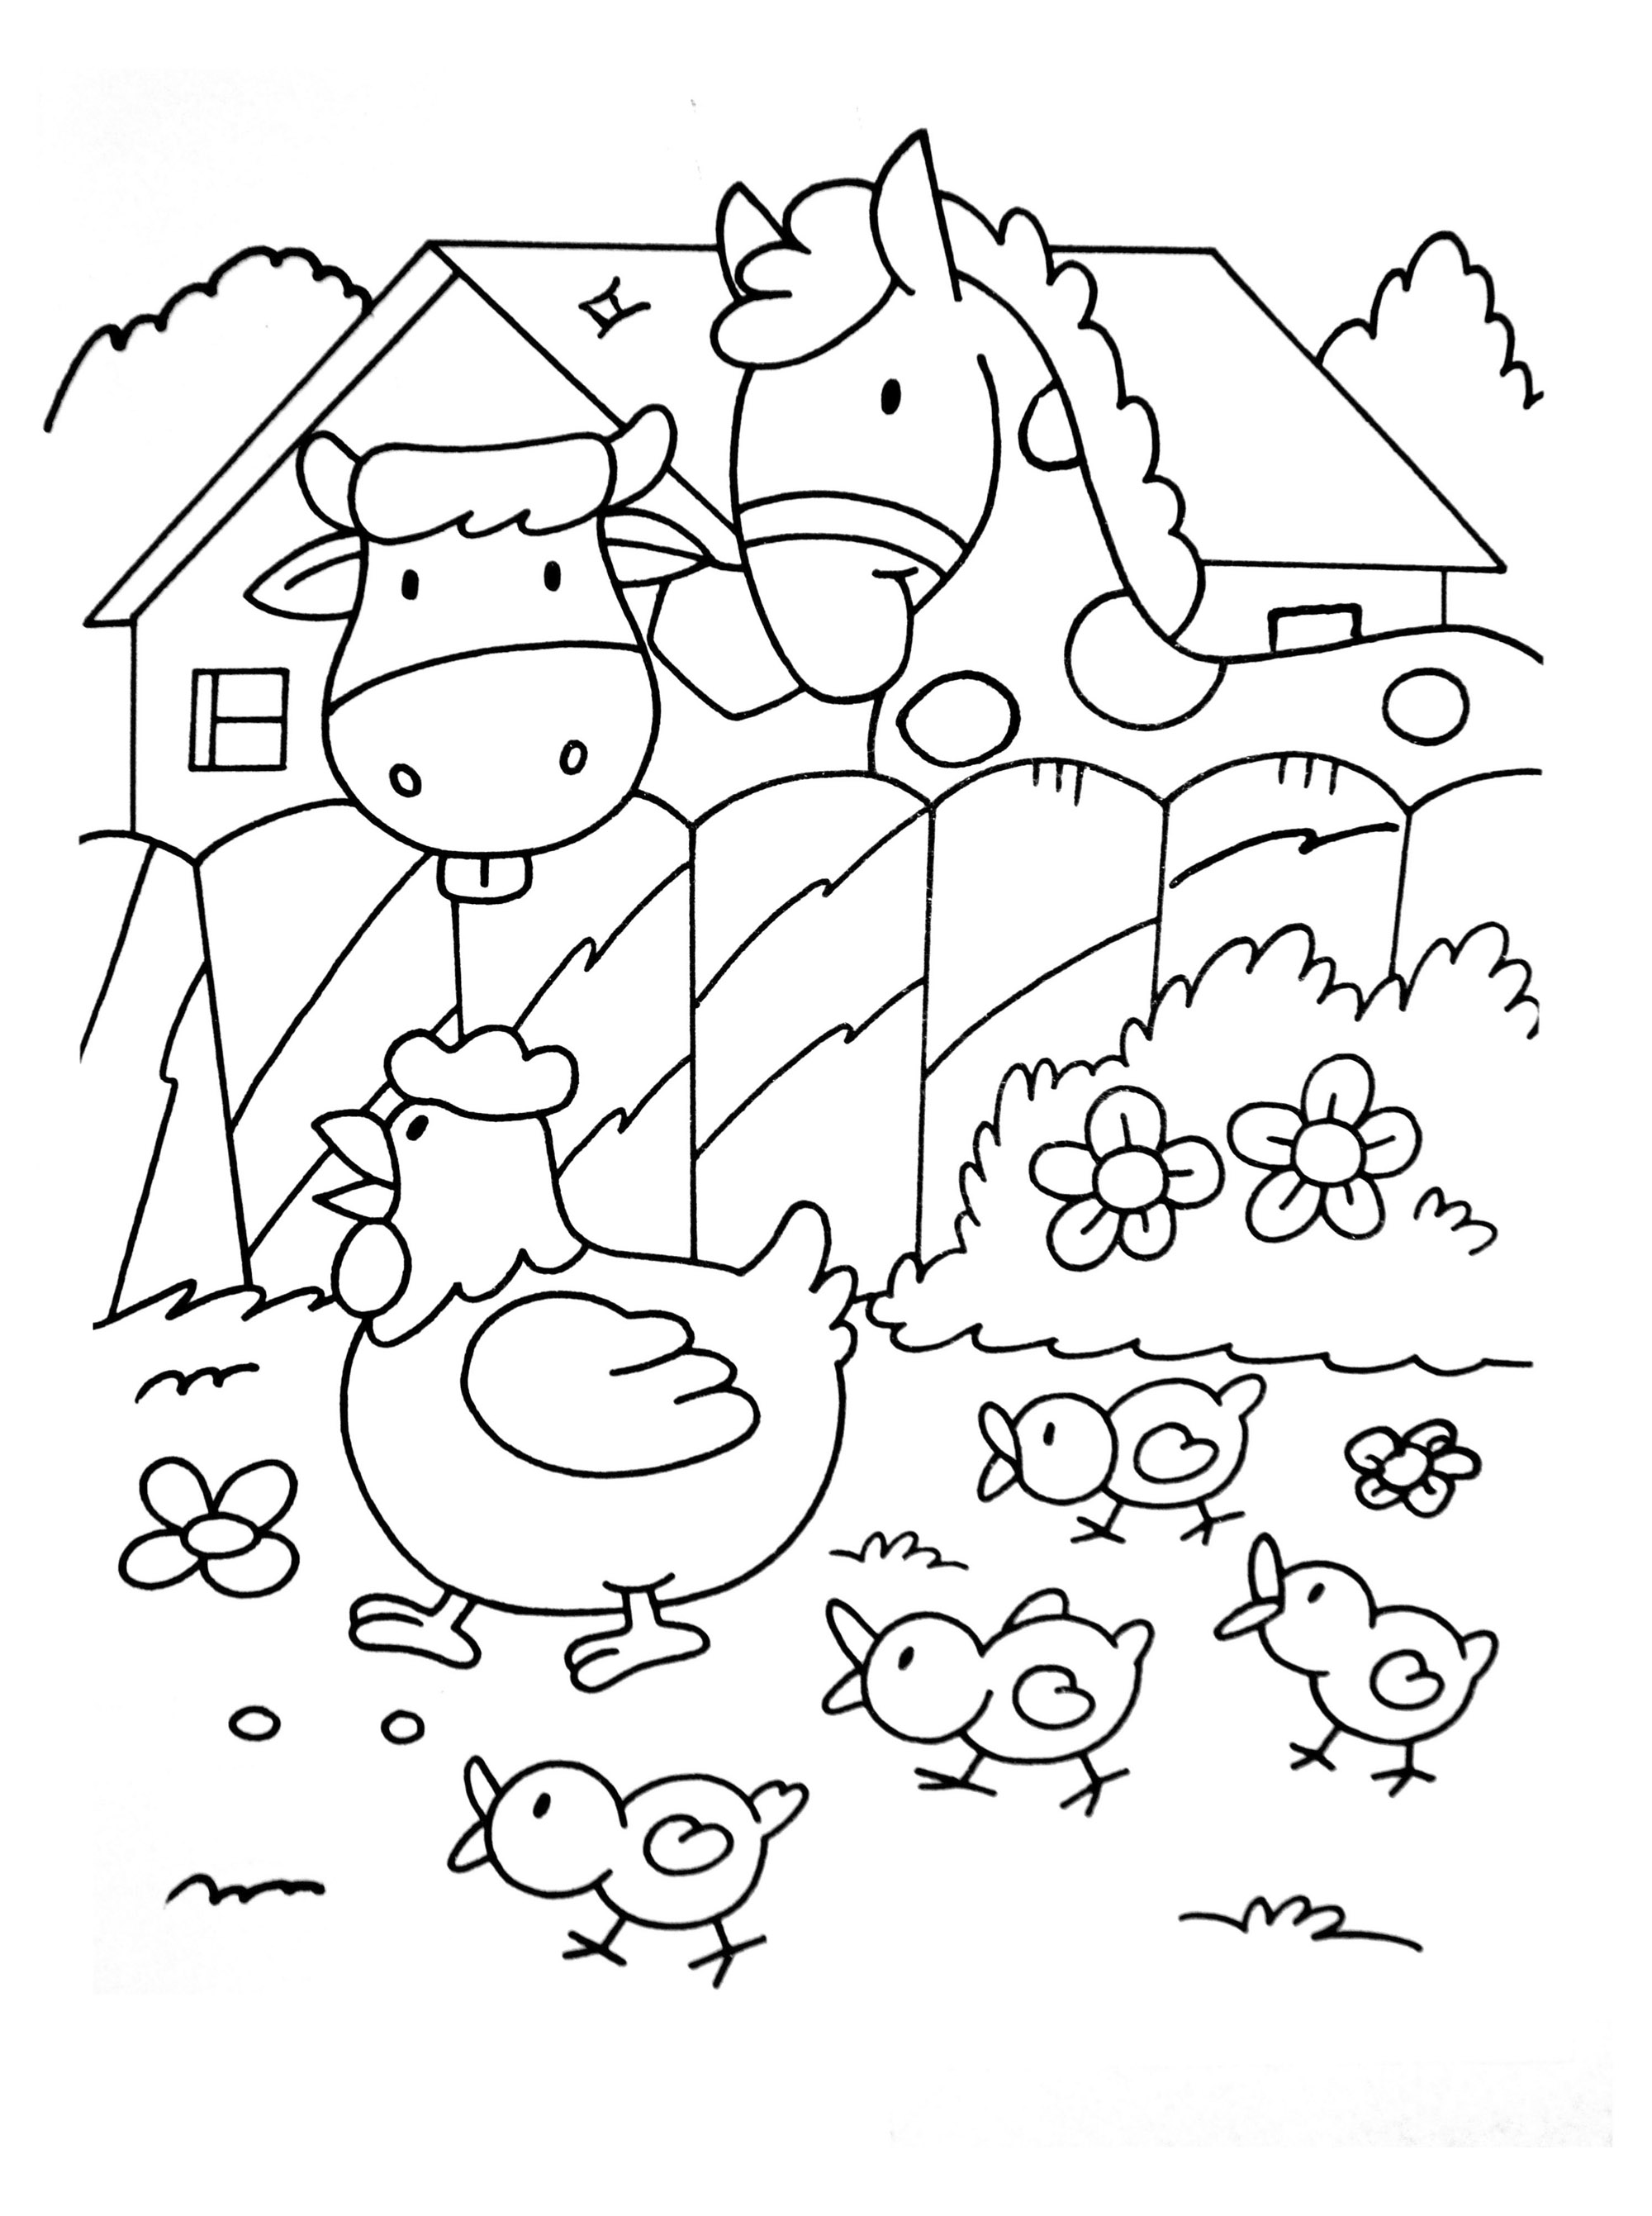 in-the-farm-animals-adult-coloring-pages